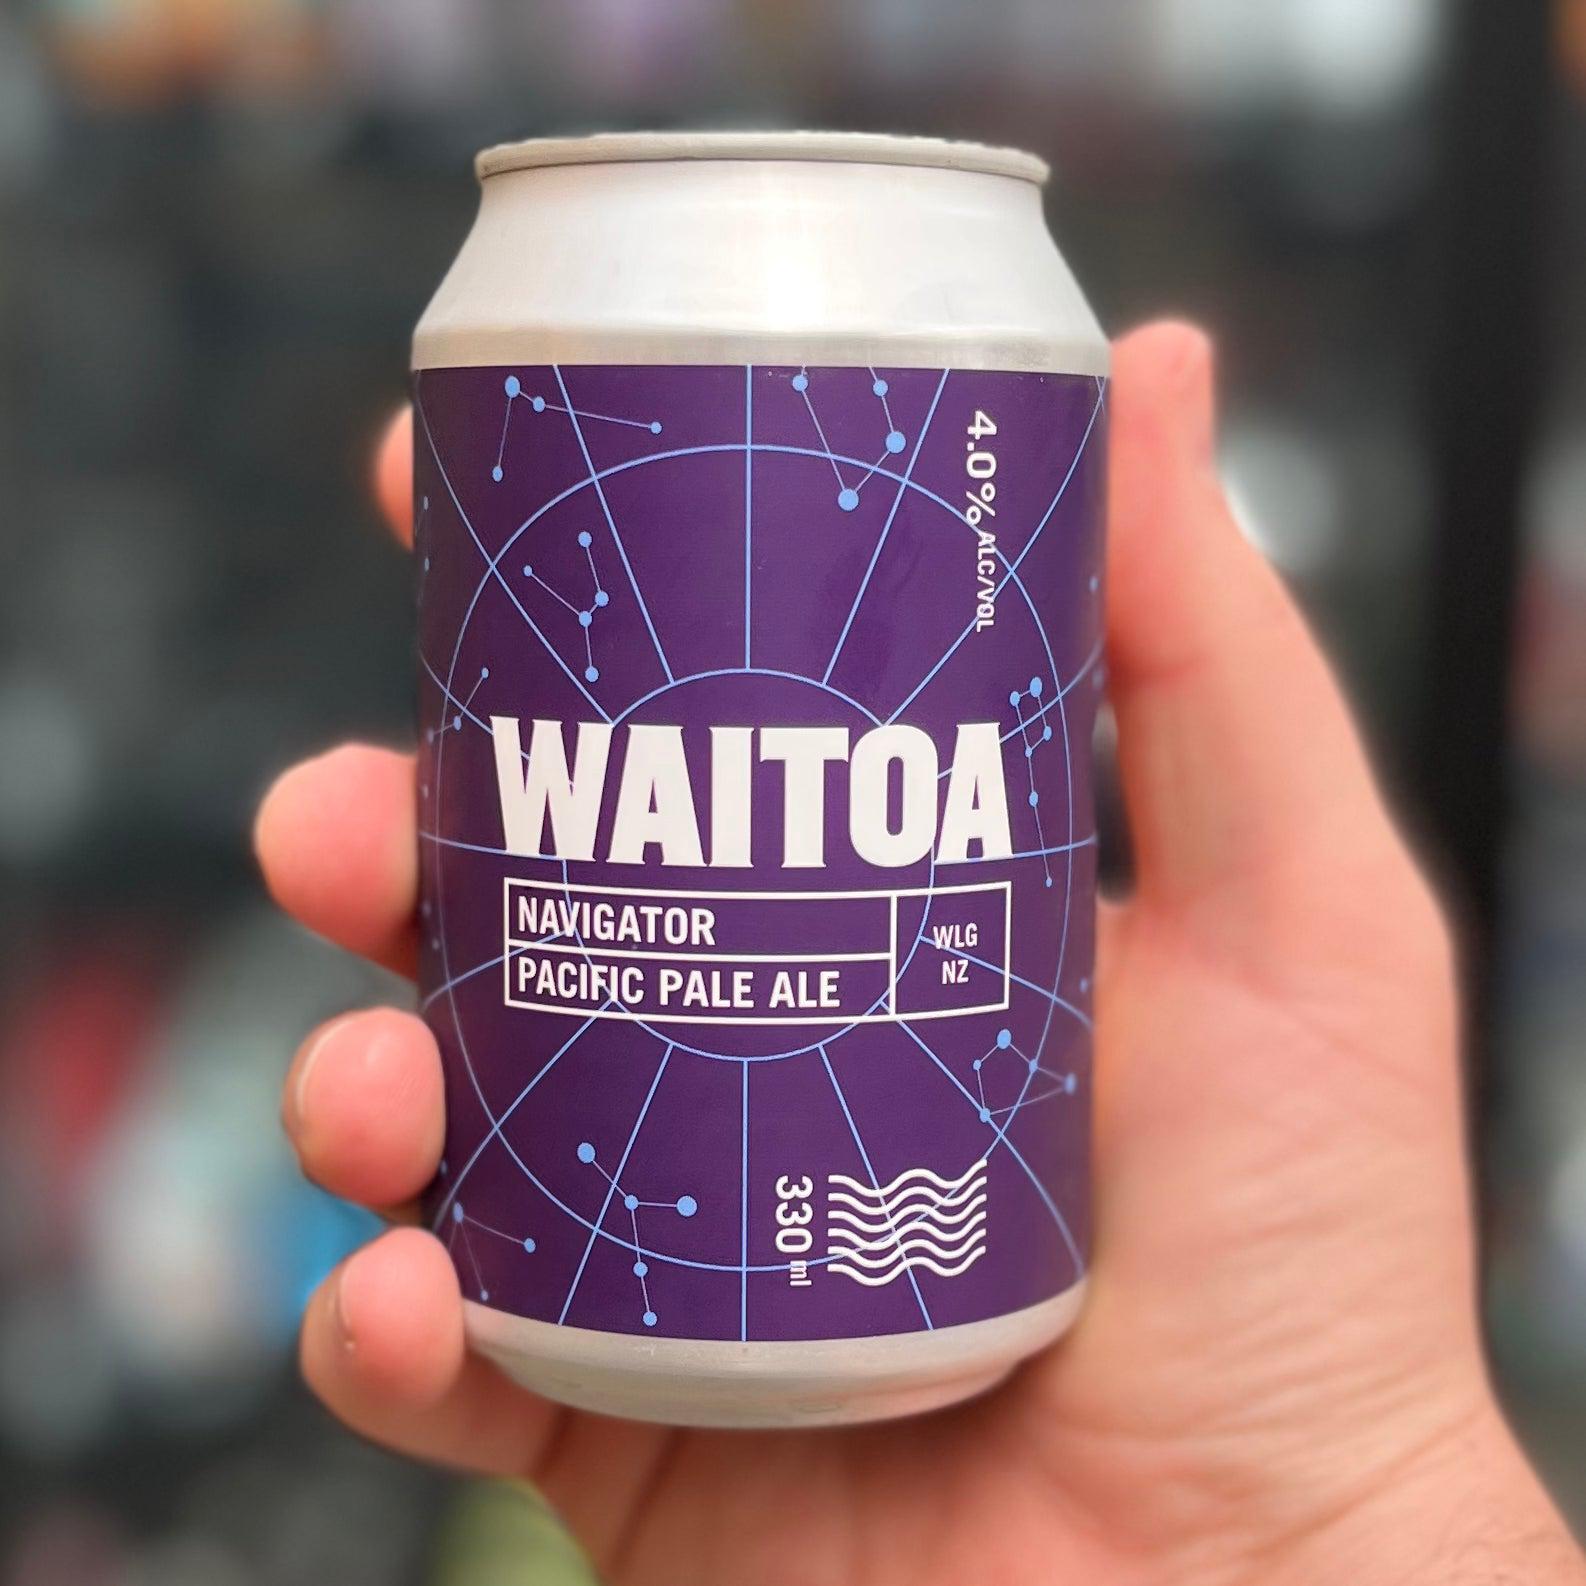 Waitoa Beer-Navigator Pacific Pale Ale-Pale Ale: - The Beer Library